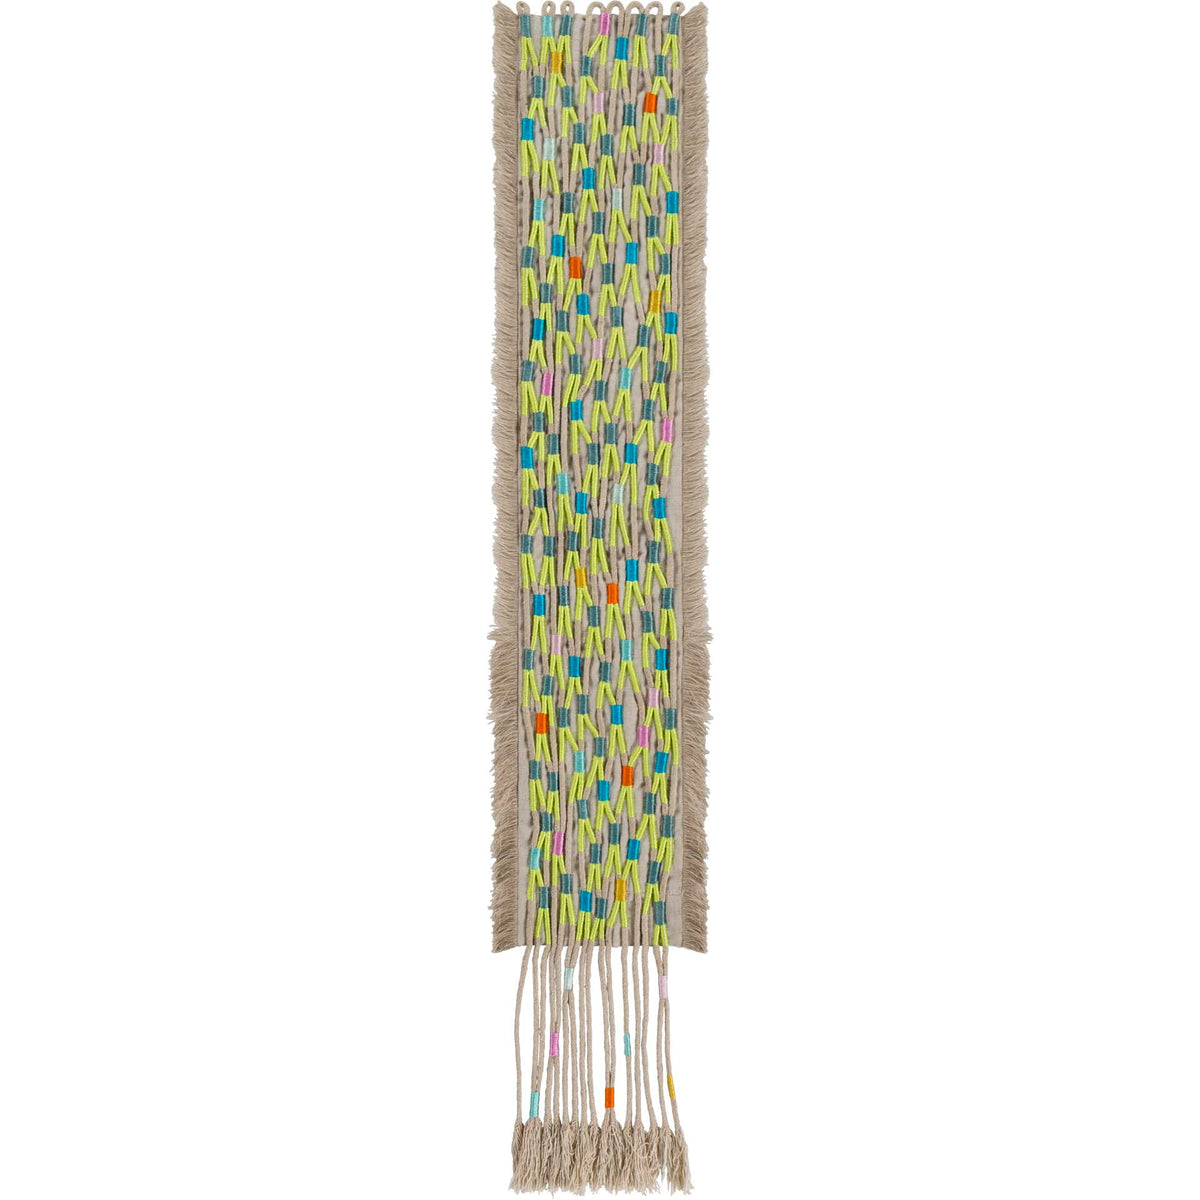 Ashley Wall Hanging Beige/Lime/Teal